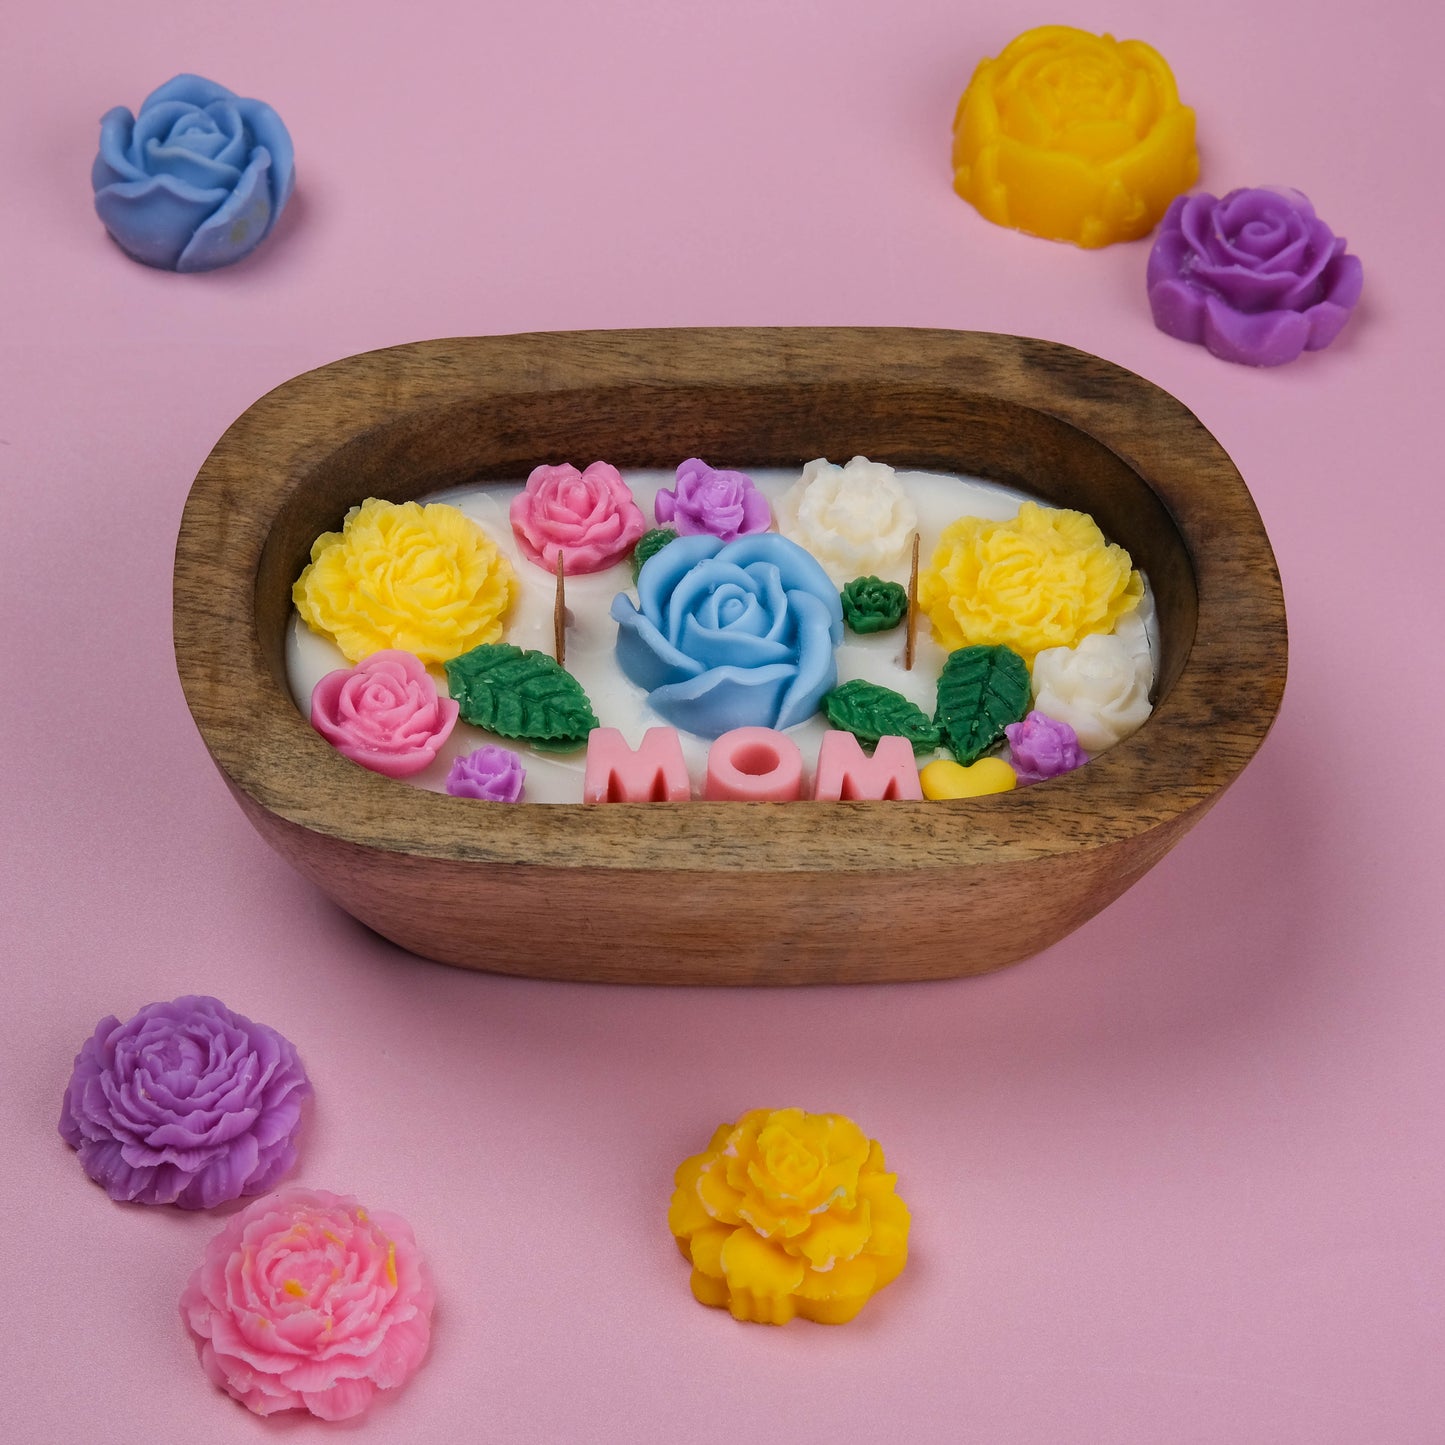 A floral tribute | Wooden Bowl Candle